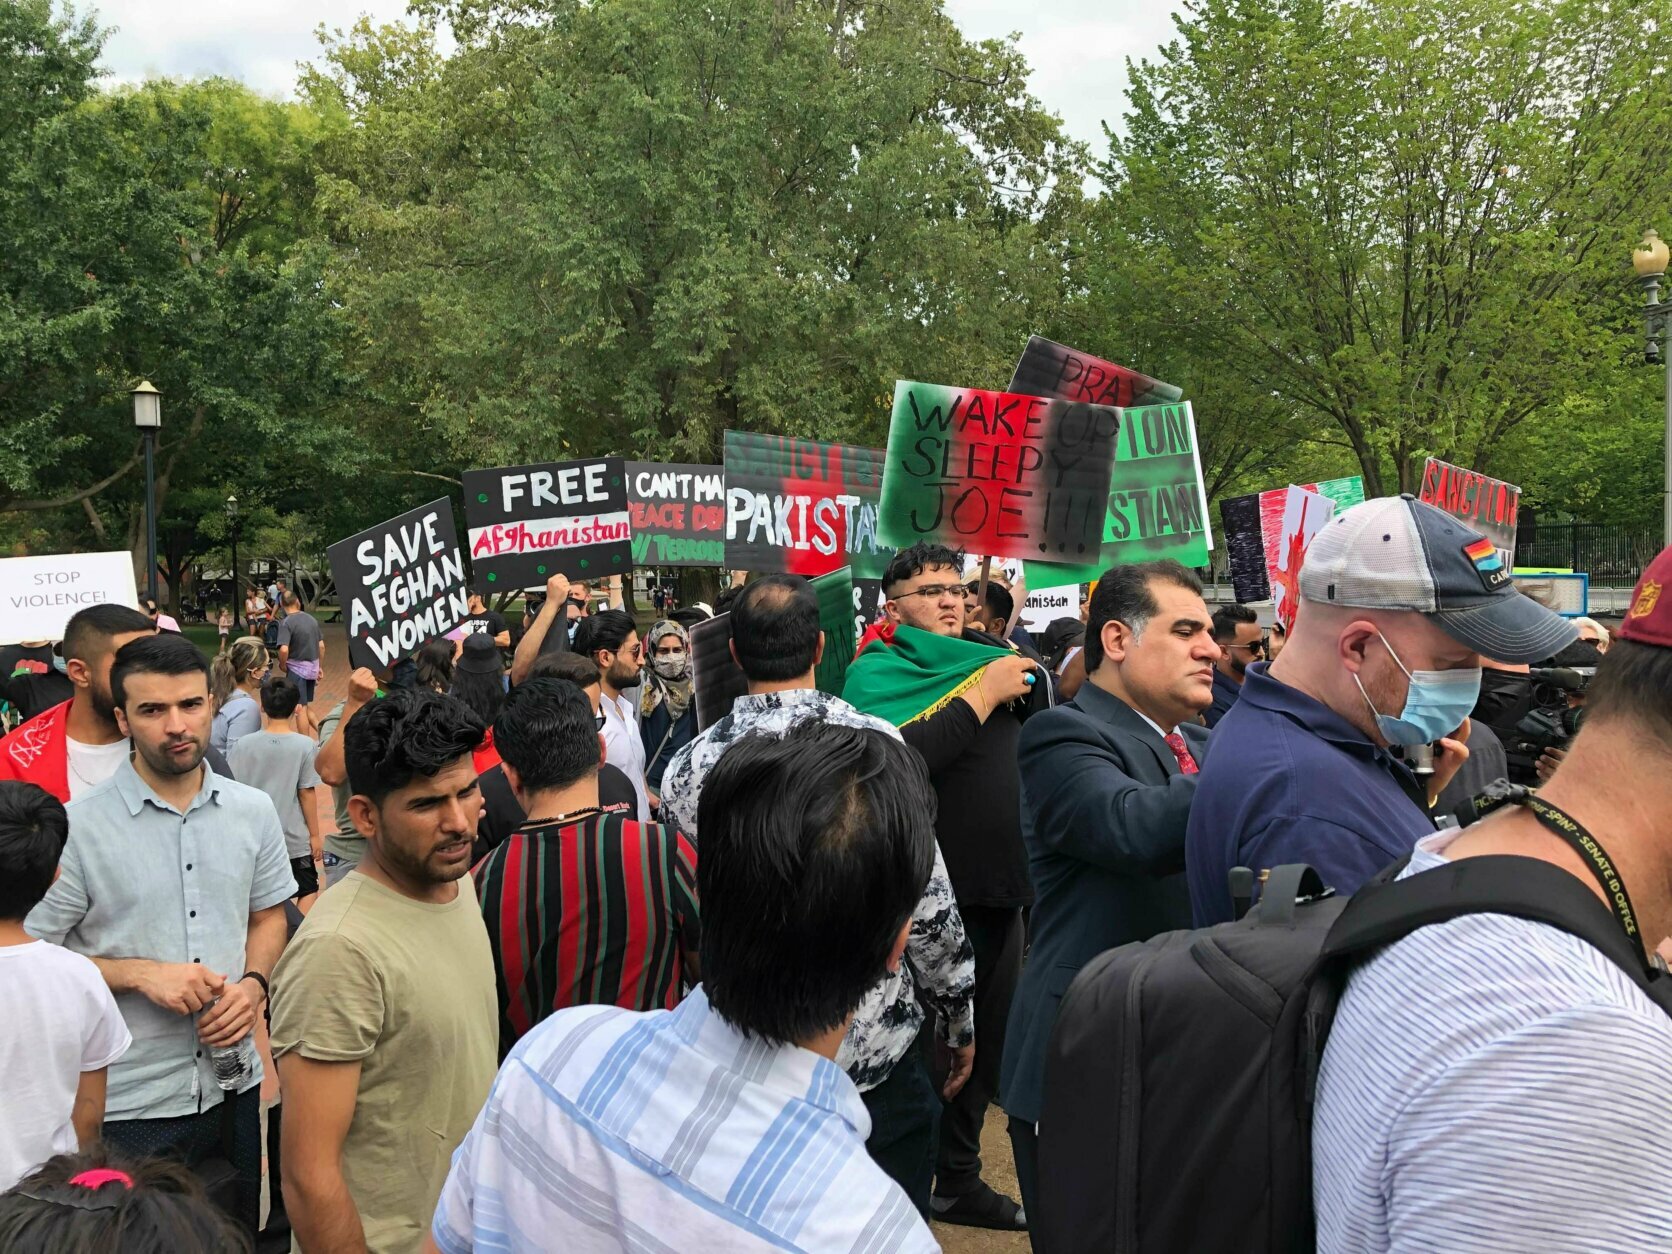 Protesters gather in front of the White House Sunday, Aug. 15, 2021, calling for support for Afghanistan after the Taliban ceased the capital, Kabul.